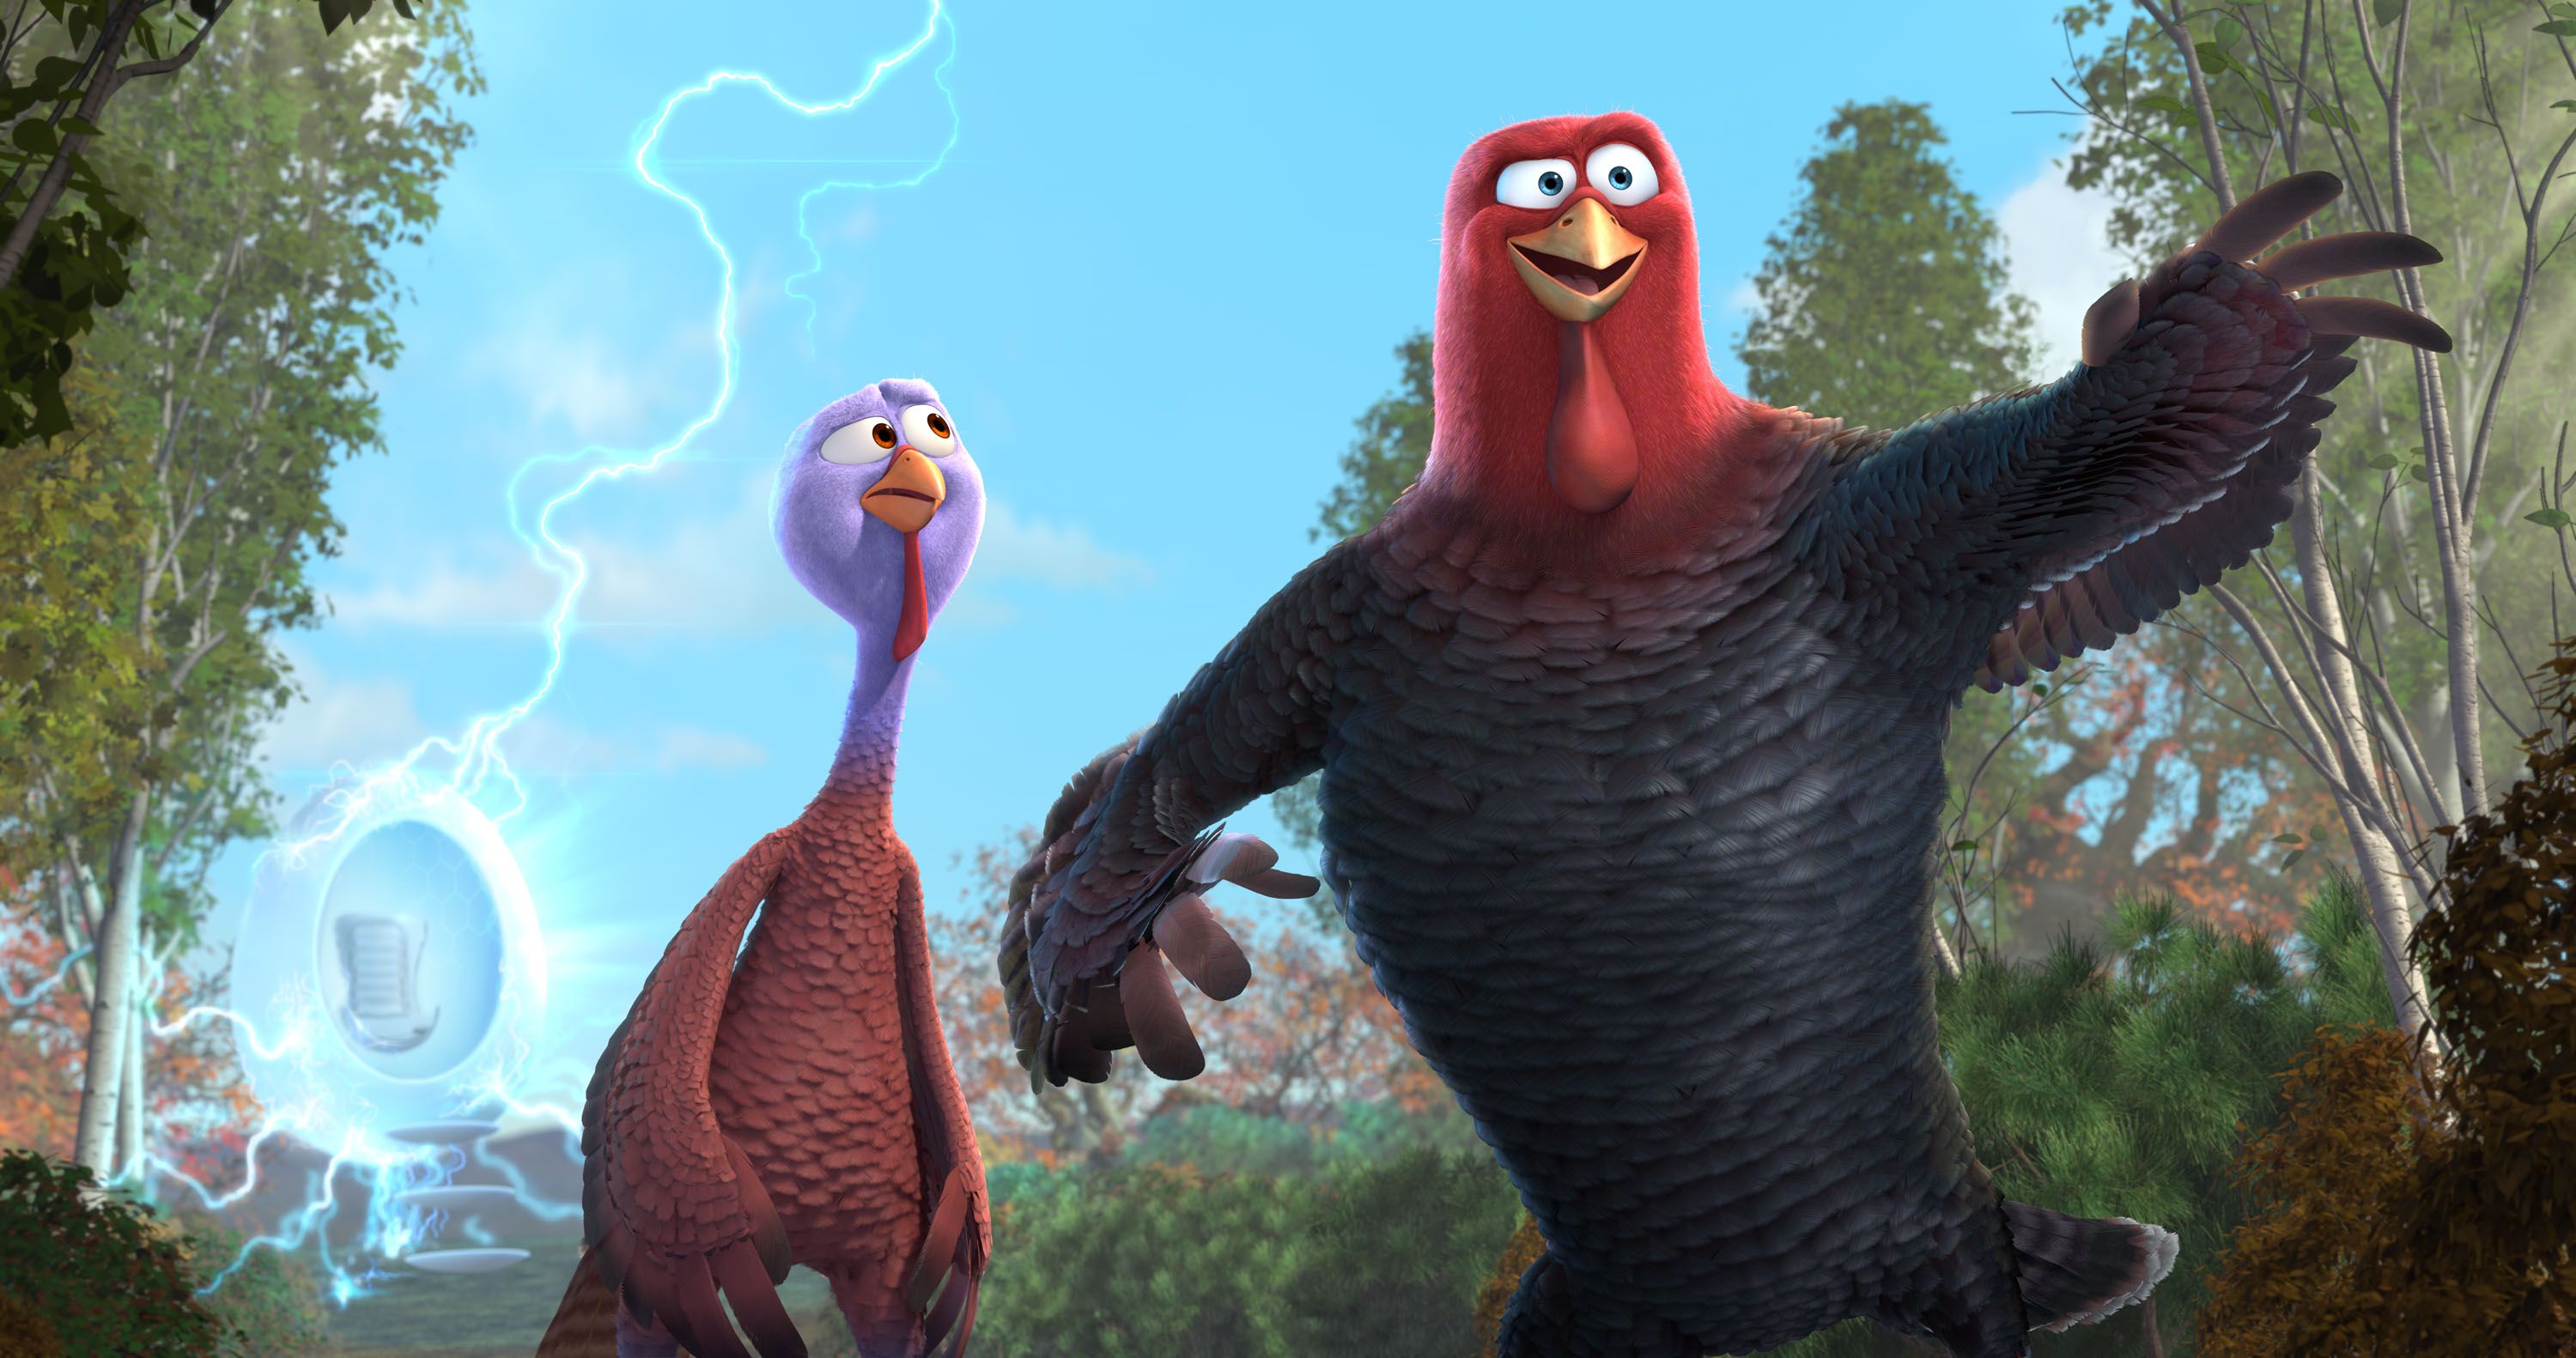 FREE BIRDS Images. FREE BIRDS Features the Voices of Owen Wilson, Woody Harrelson, and ...